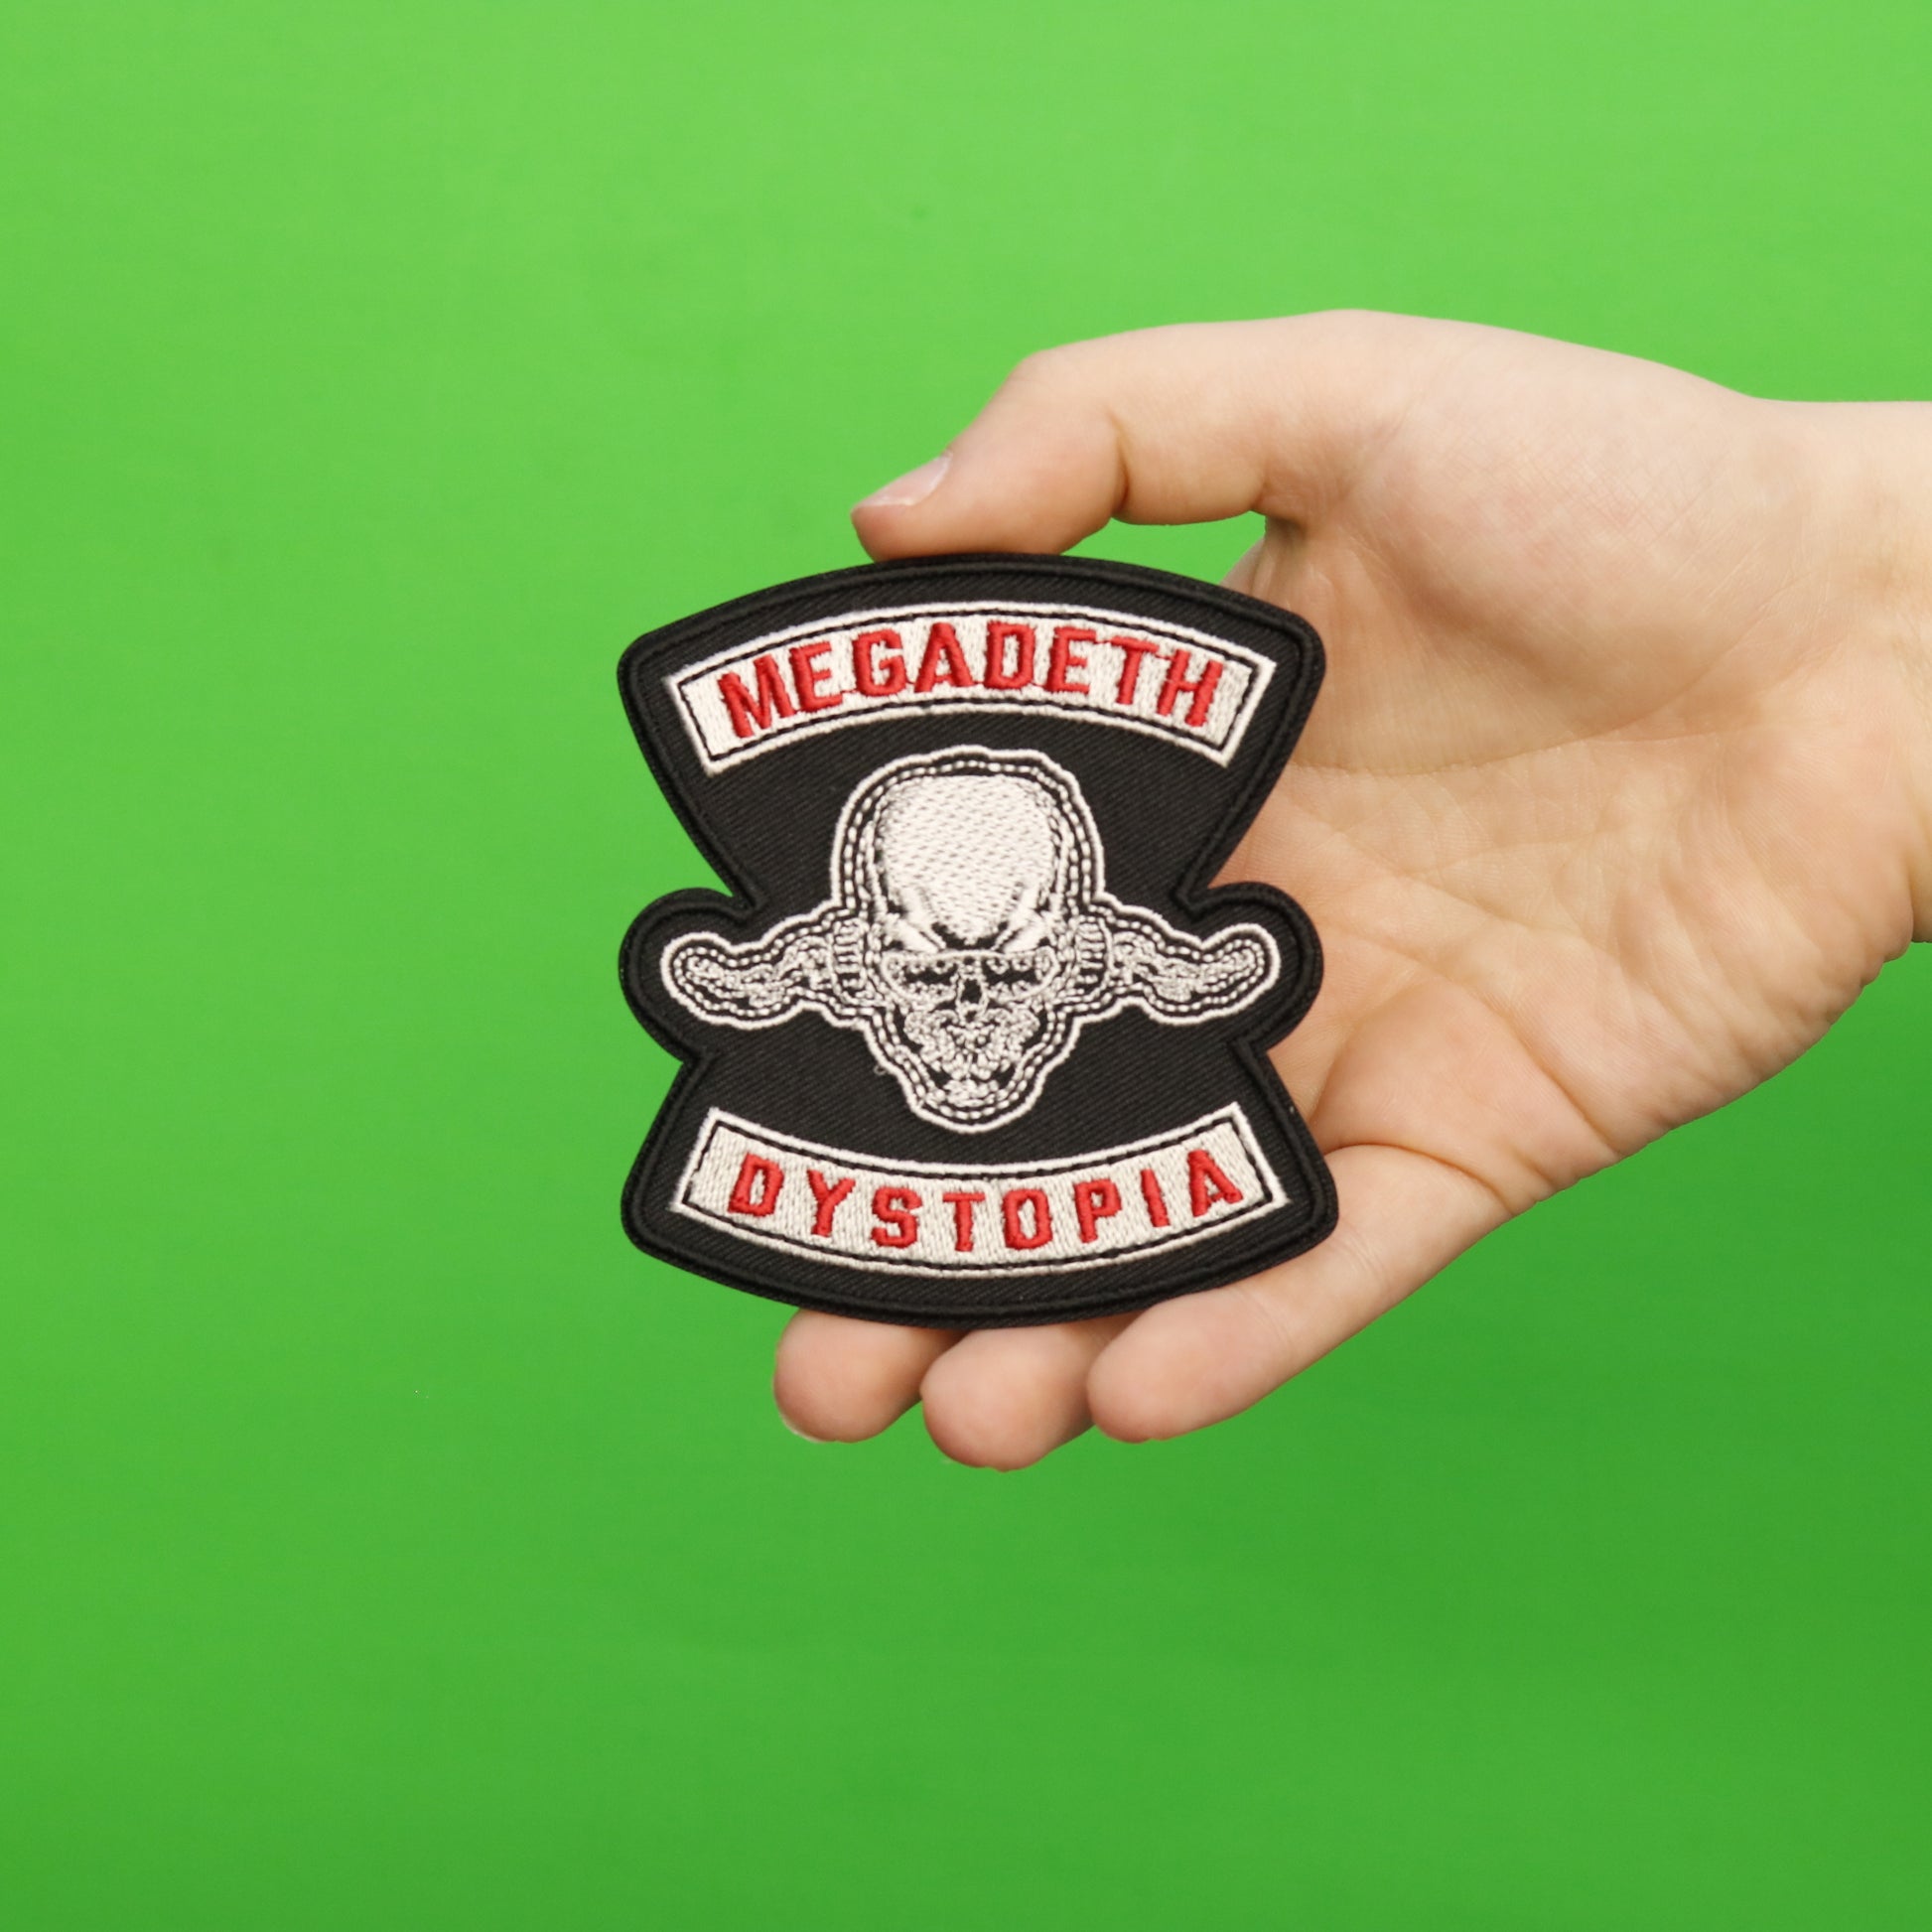 Megadeth Dystopia Embroidered Iron On Patch 